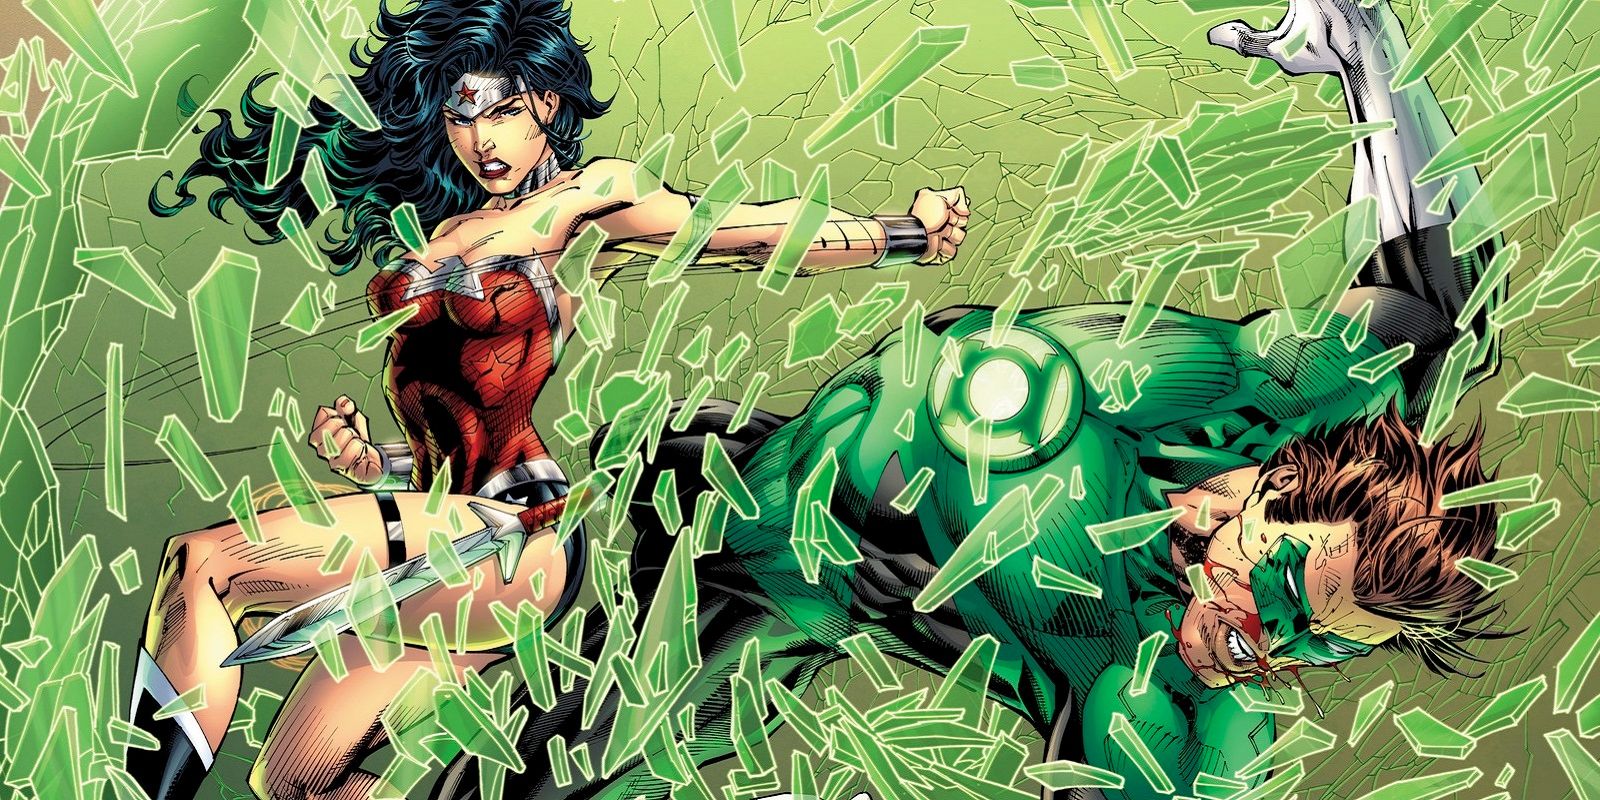 Wonder Woman punches Green Lantern in the Justice League comics